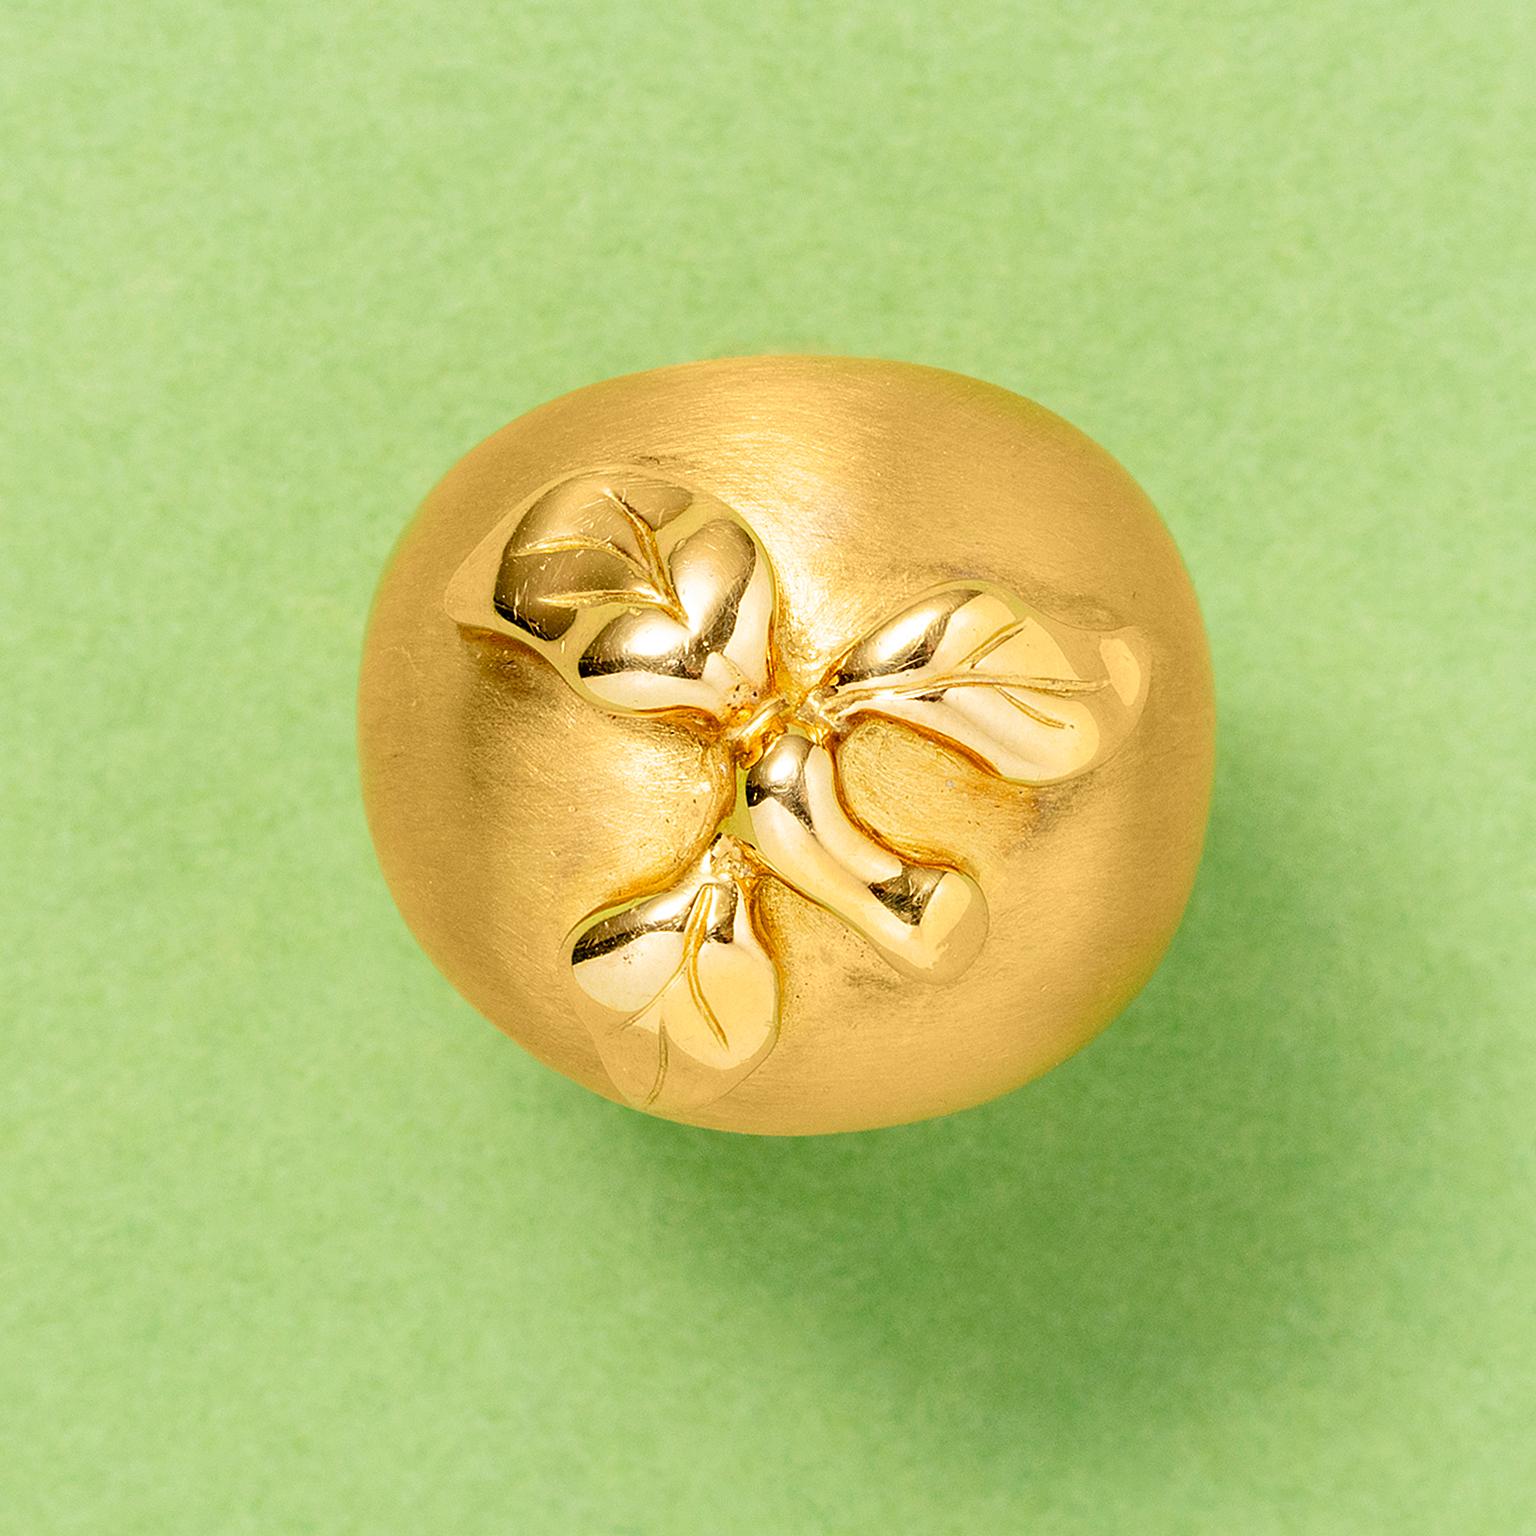 An 18 carat gold ring in the shape of an apple, with a matte surface and with polished leaves and stem, France with aFrench assay mark and French master mark.

weight: 14.6 g
ring size: 15.75 mm / 5 US fits as a 16 - 16+ mm / 5.5 US